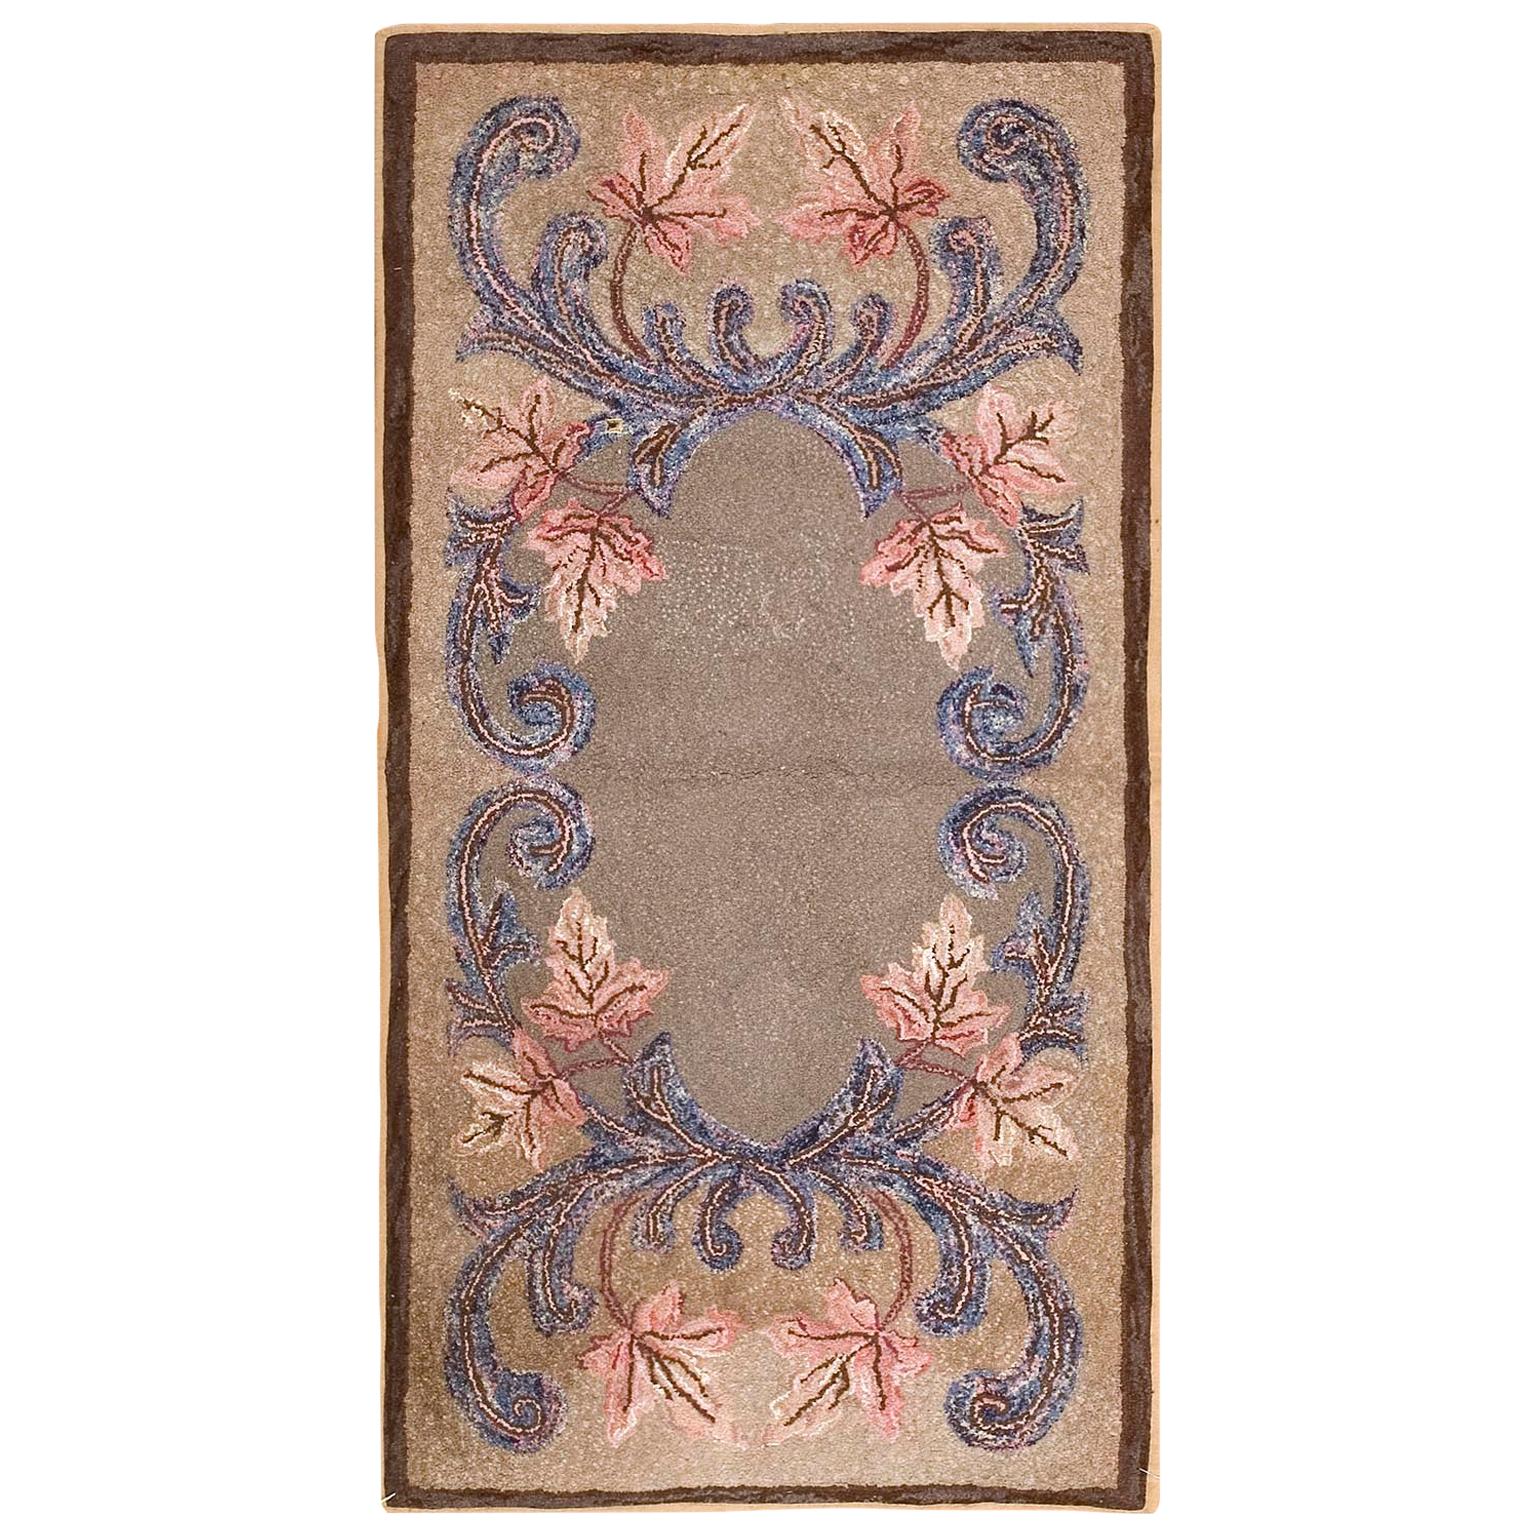 Antique American Hooked Rug 2' 6" x 4' 8" For Sale